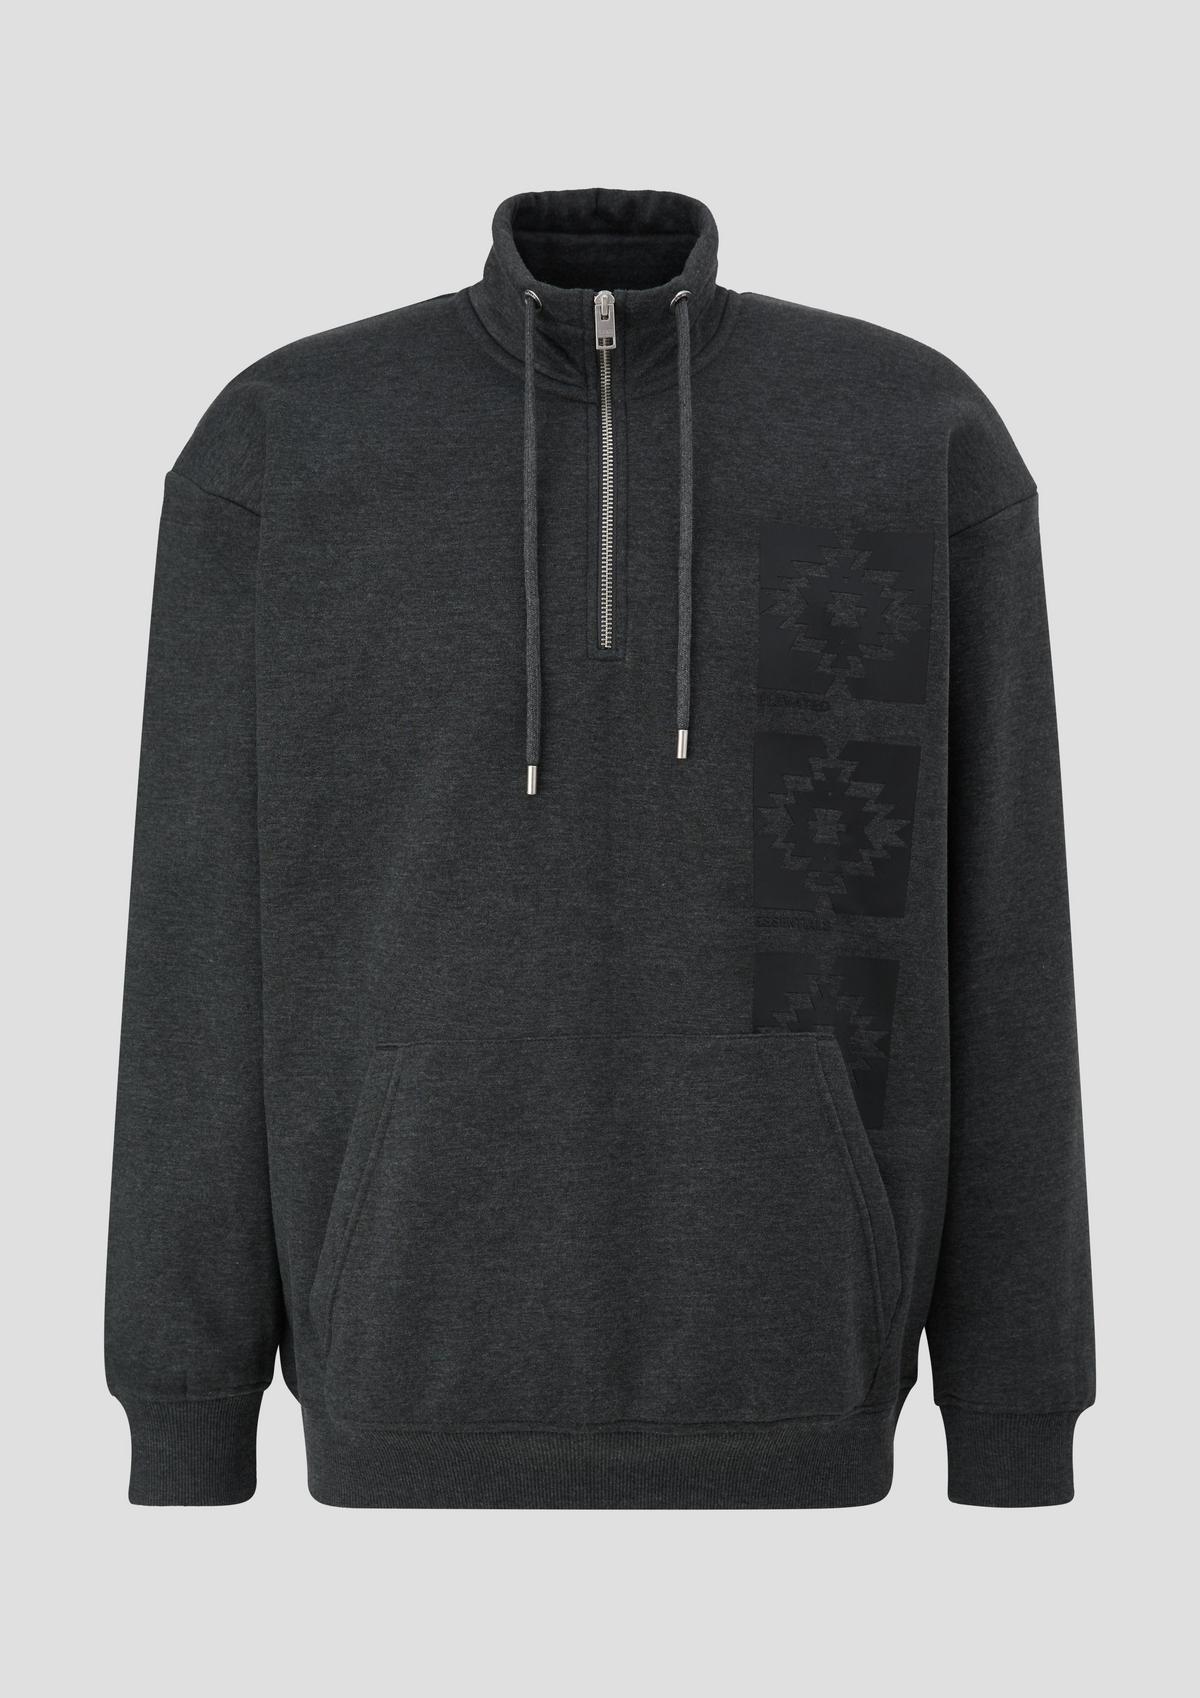 s.Oliver Sweatshirt with a button/zip neck